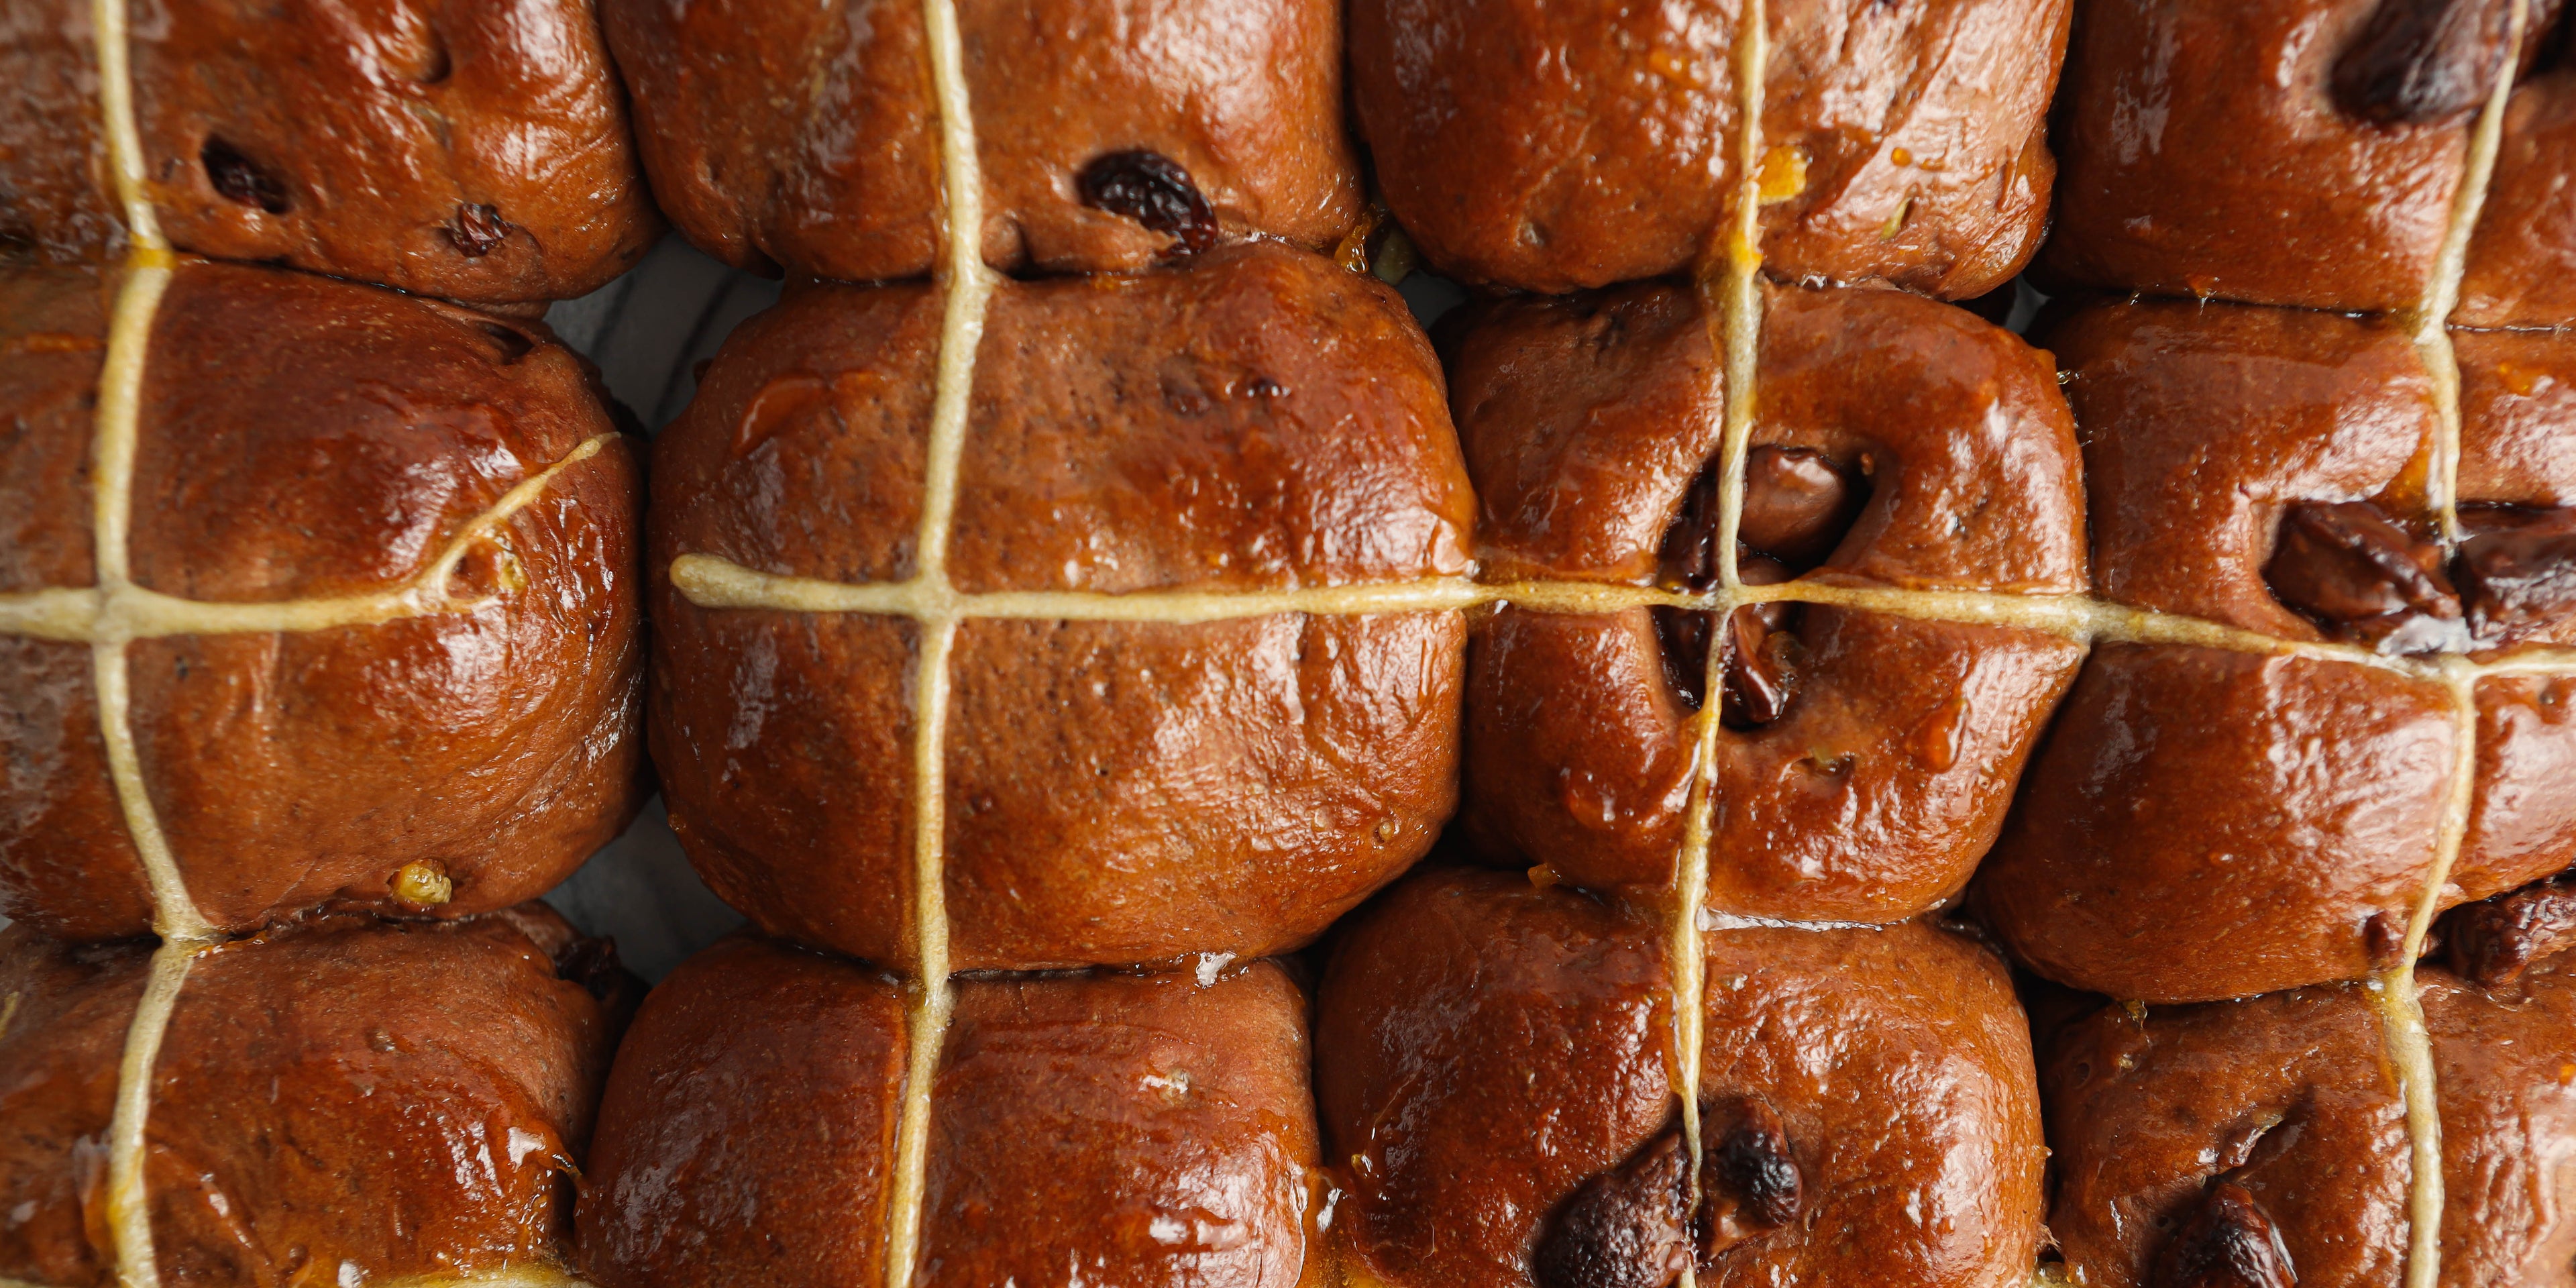 Close up of a batch of Chocolate Hot Cross Buns freshly baked